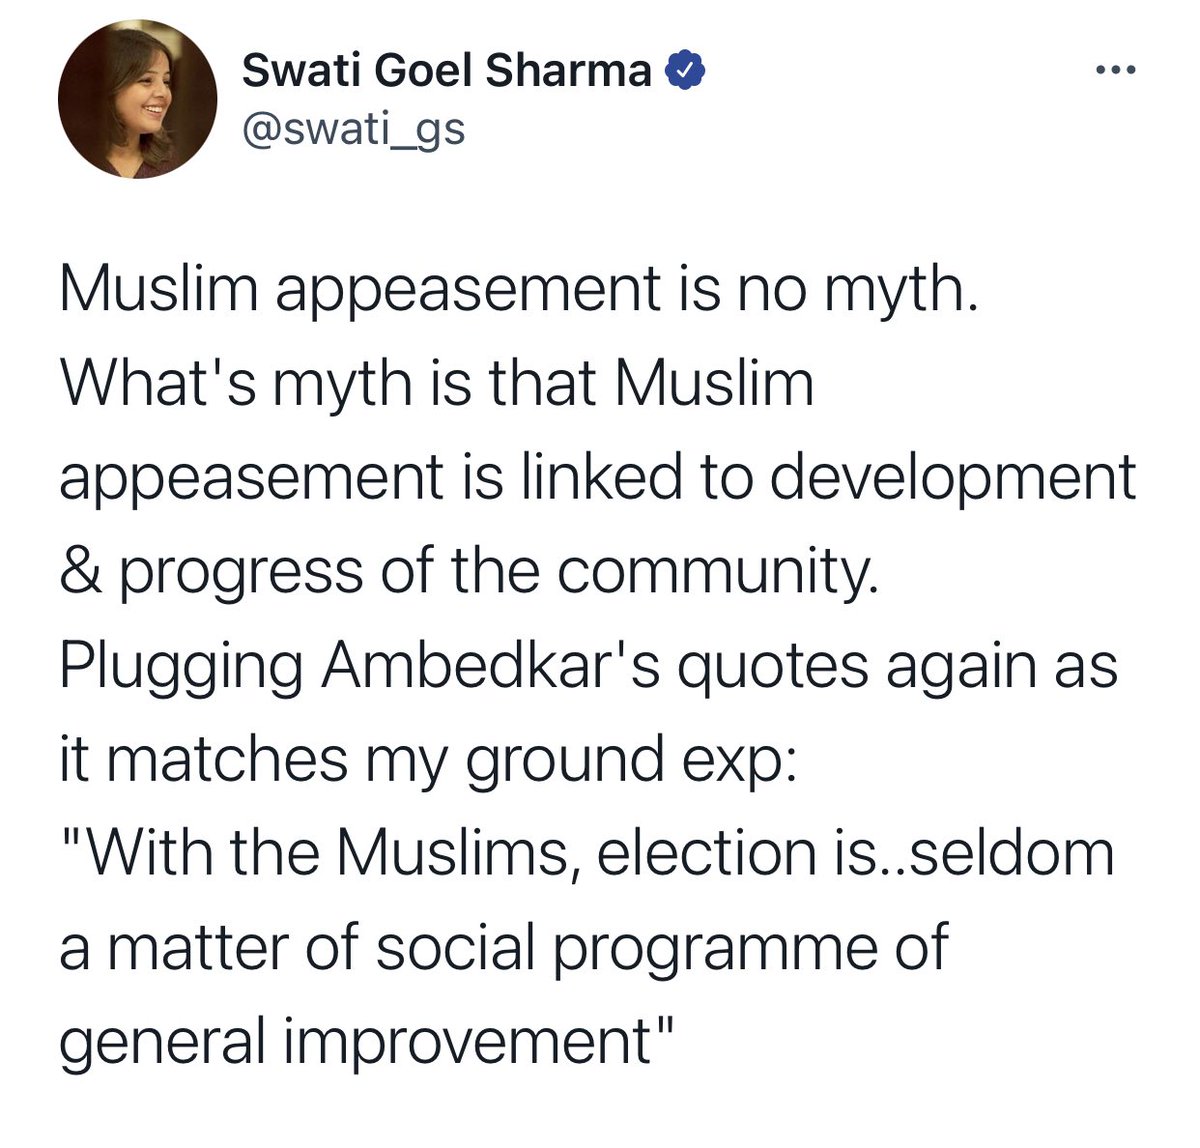 Shifting goalposts, a distaste for a level playing field and an inability to deal with reality are defining characteristics of Hindutva supremacism.Anticipating a knock of reality  @swati_gs cries “Muslim appeasement”; even if development and progress are not factors. #Thread.